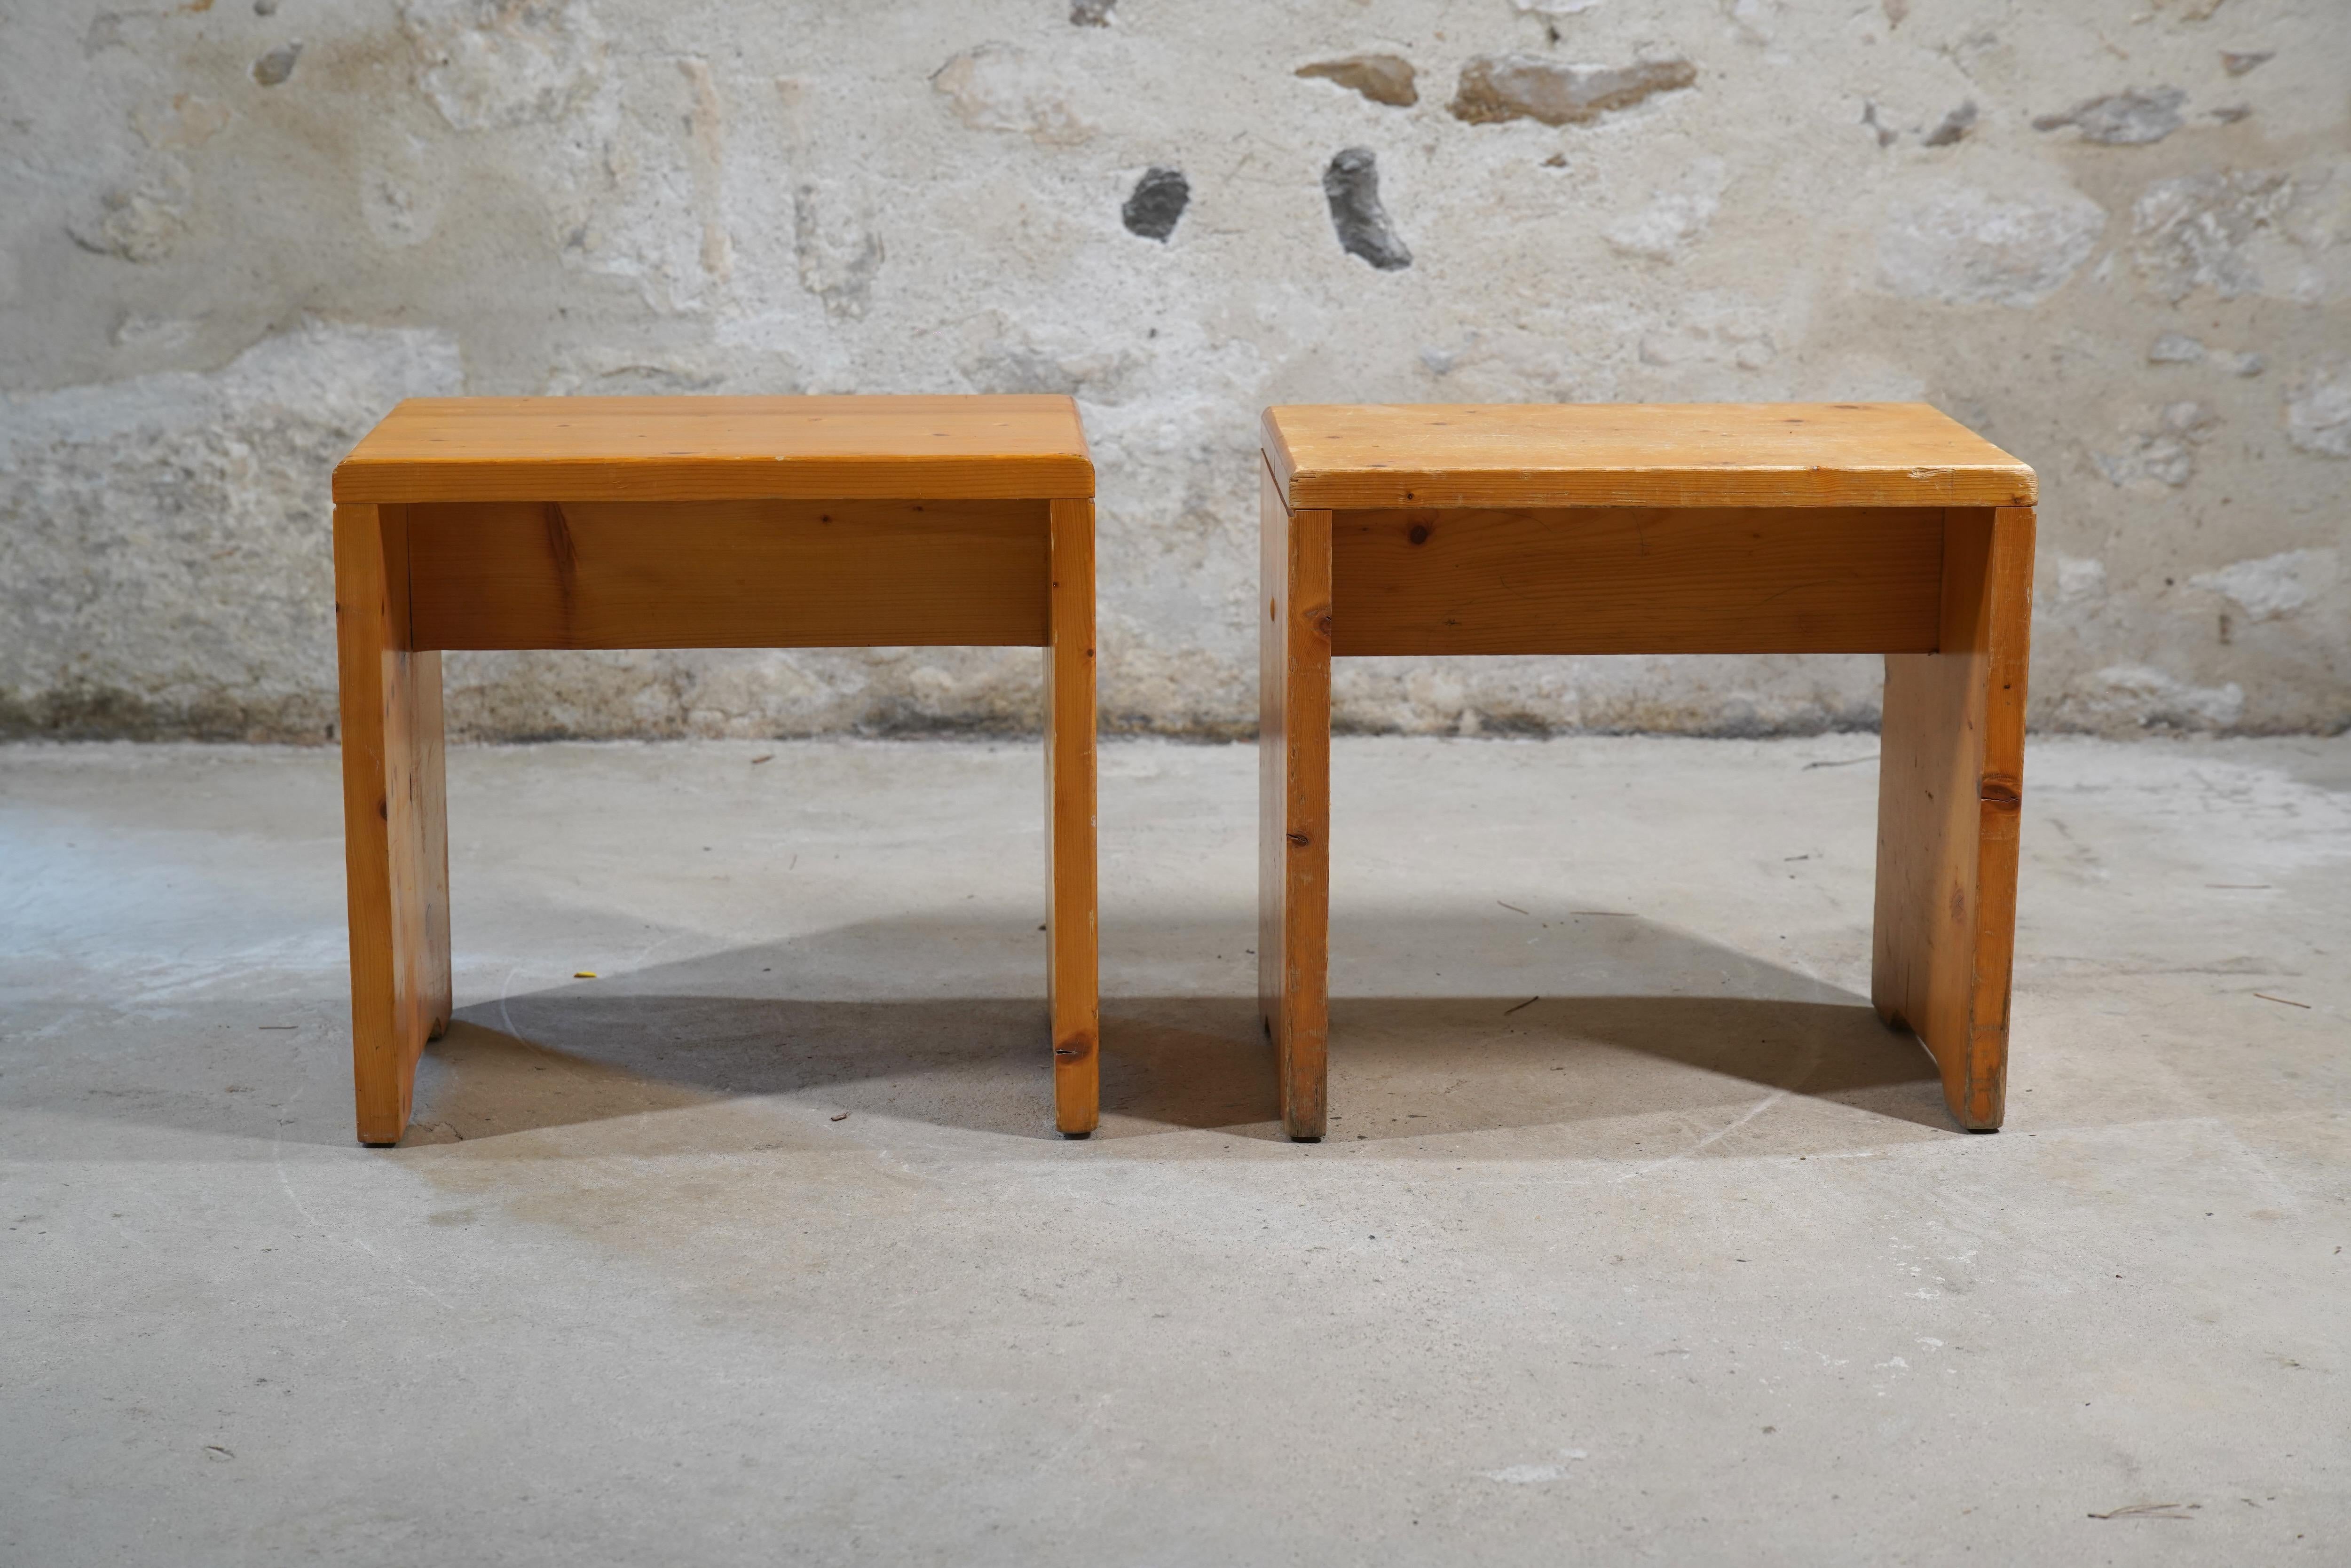 Charlotte Perriand Stools from Les Arcs, France circa 1968 (4 Available) For Sale 11